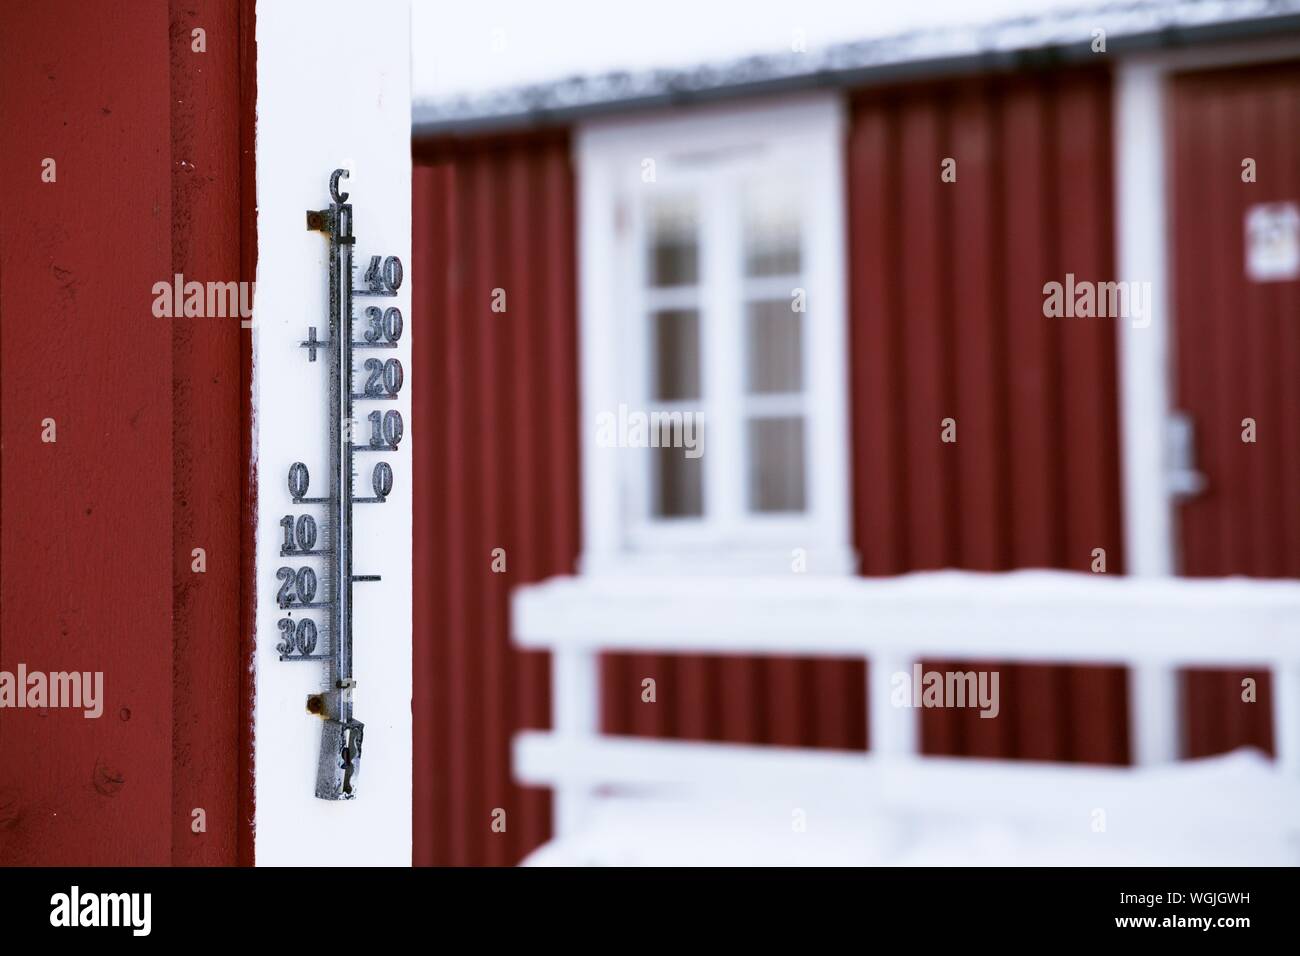 Premium Photo  Outdoor thermometer near abstract house building 3d  rendering